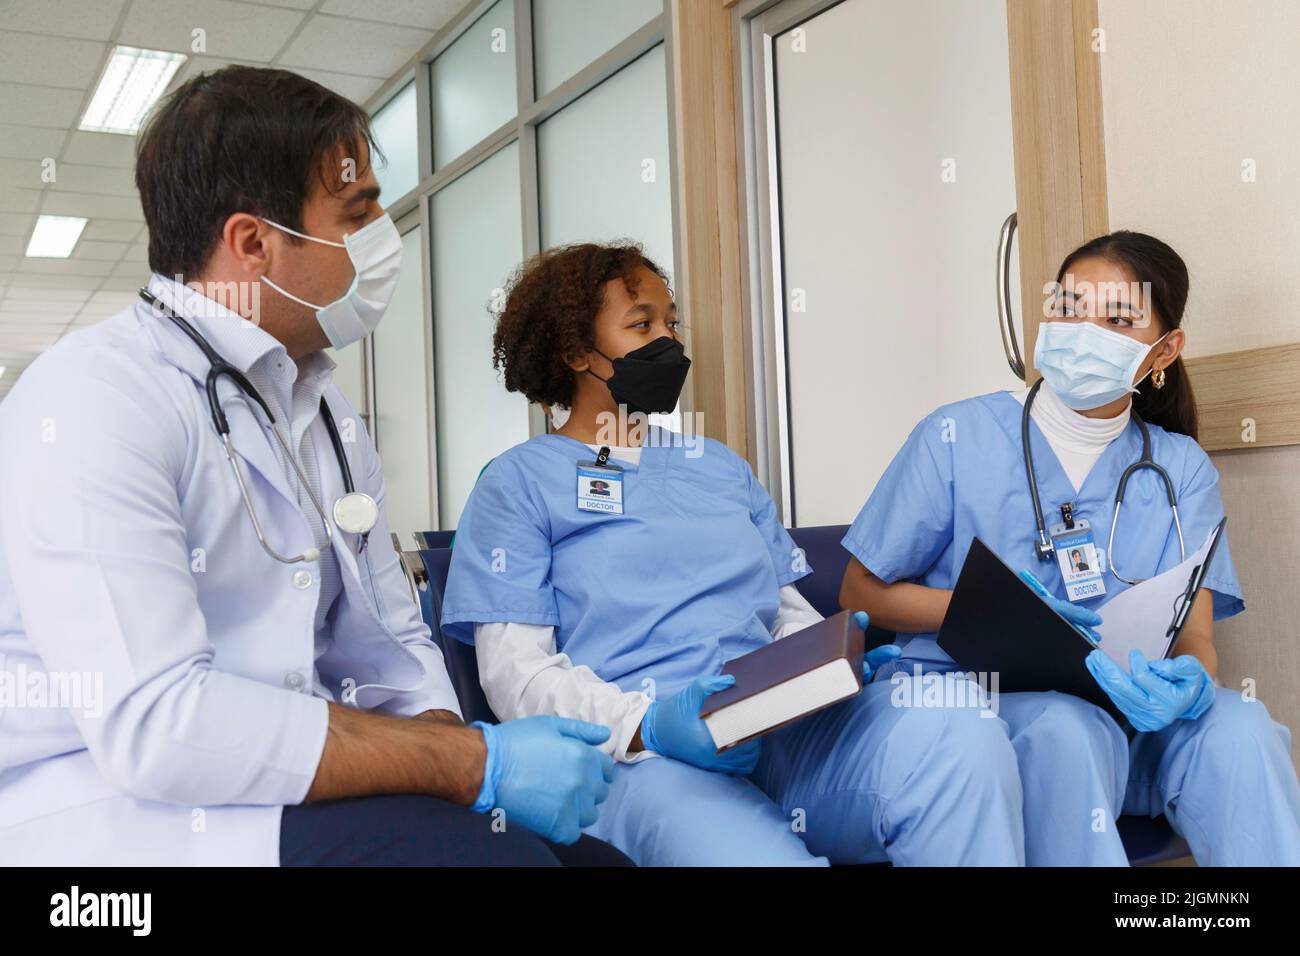 professor doctor give advice and discuss with intern student team for surgery planning and patient treatment in the hospital medical school. healthcar Stock Photo